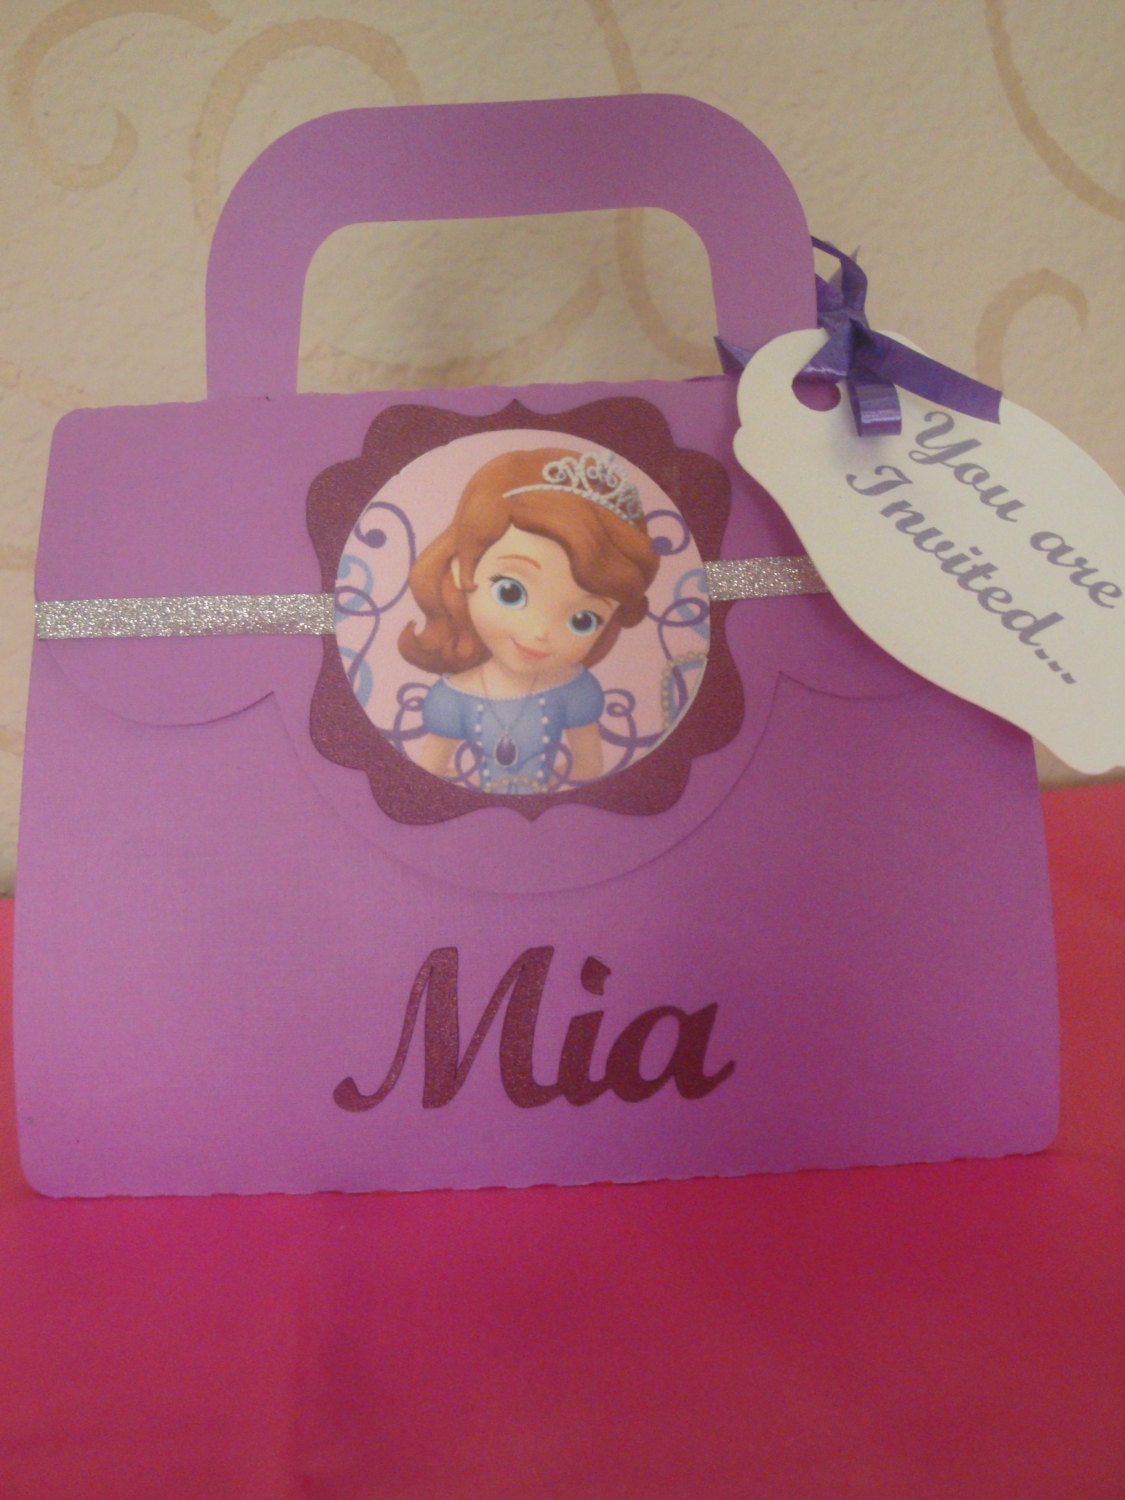 Princess Sofia the First party invitatons-Set of 8 | Etsy